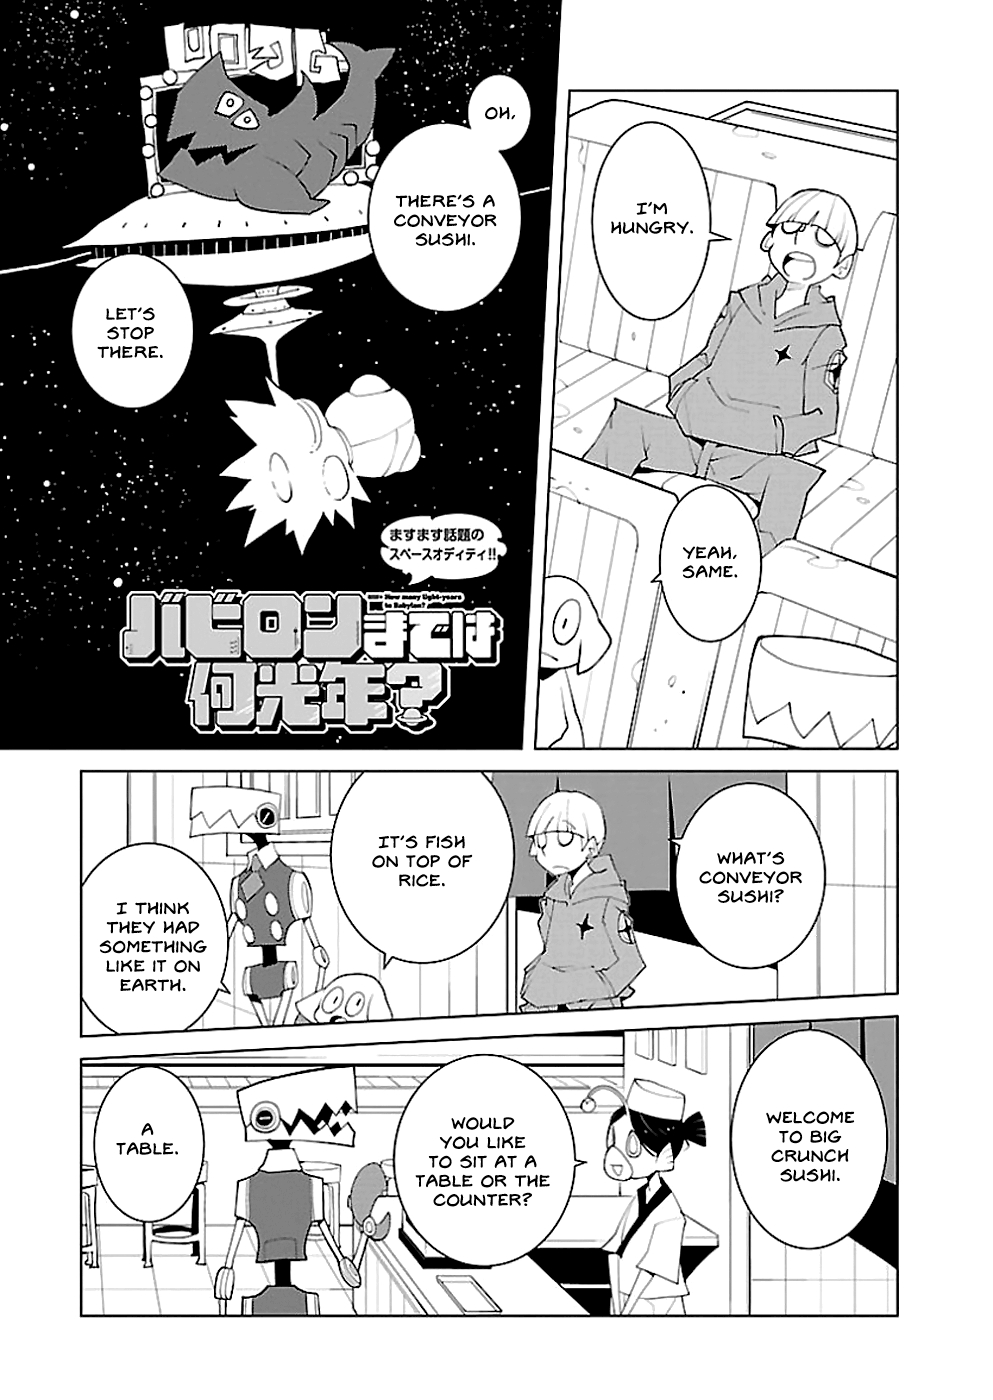 How Many Light-Years to Babylon? Vol.1 Ch.5